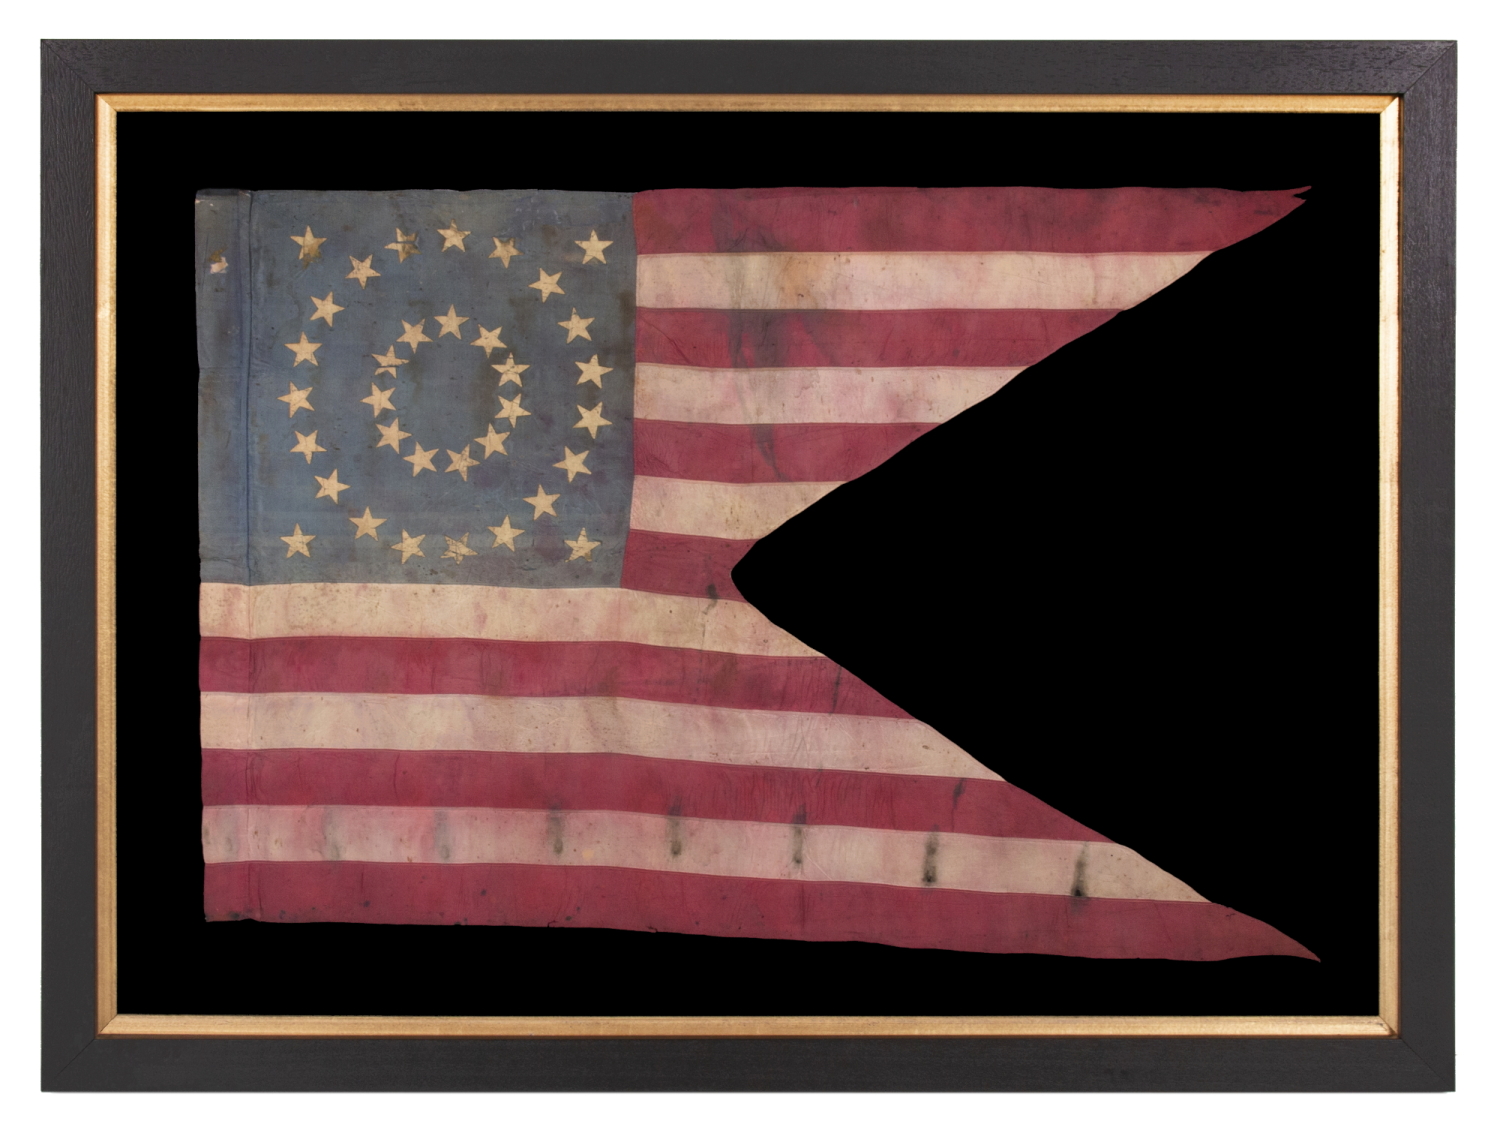 34 STAR, AMERICAN, CIVIL WAR GUIDON OF THE 6th KENTUCKY CAVALRY (UNION), WITH A DOUBLE-WREATH MEDALLION CONFIGURATION OF STARS, MADE circa 1861-1863, HANDED DOWN THROUGH THE FAMILY OF LT. COL. JAMES MEAGHER, ACCOMPANIED BY HIS SHOULDER BARS AND DIARY